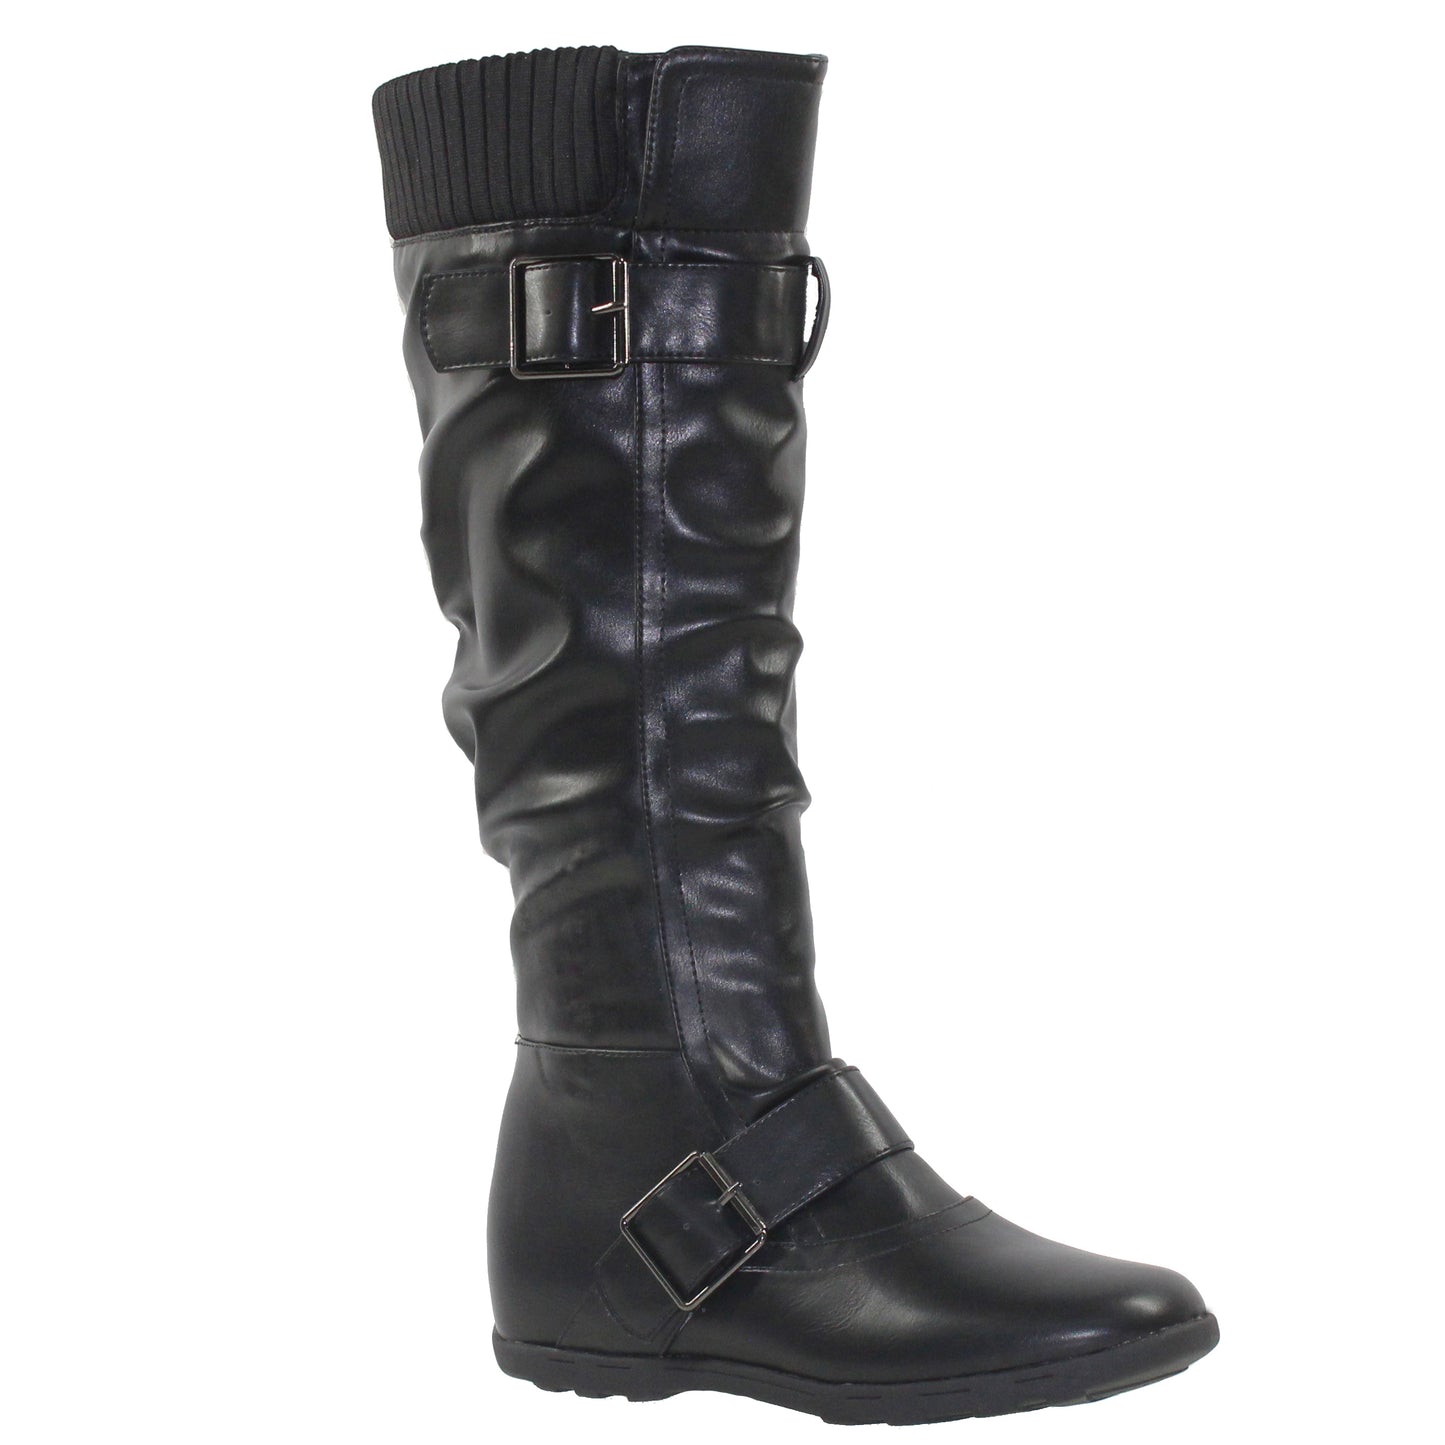 SOBEYO Women's Boots Ruched Knit Cuff Double Straps Buckles Black Leather